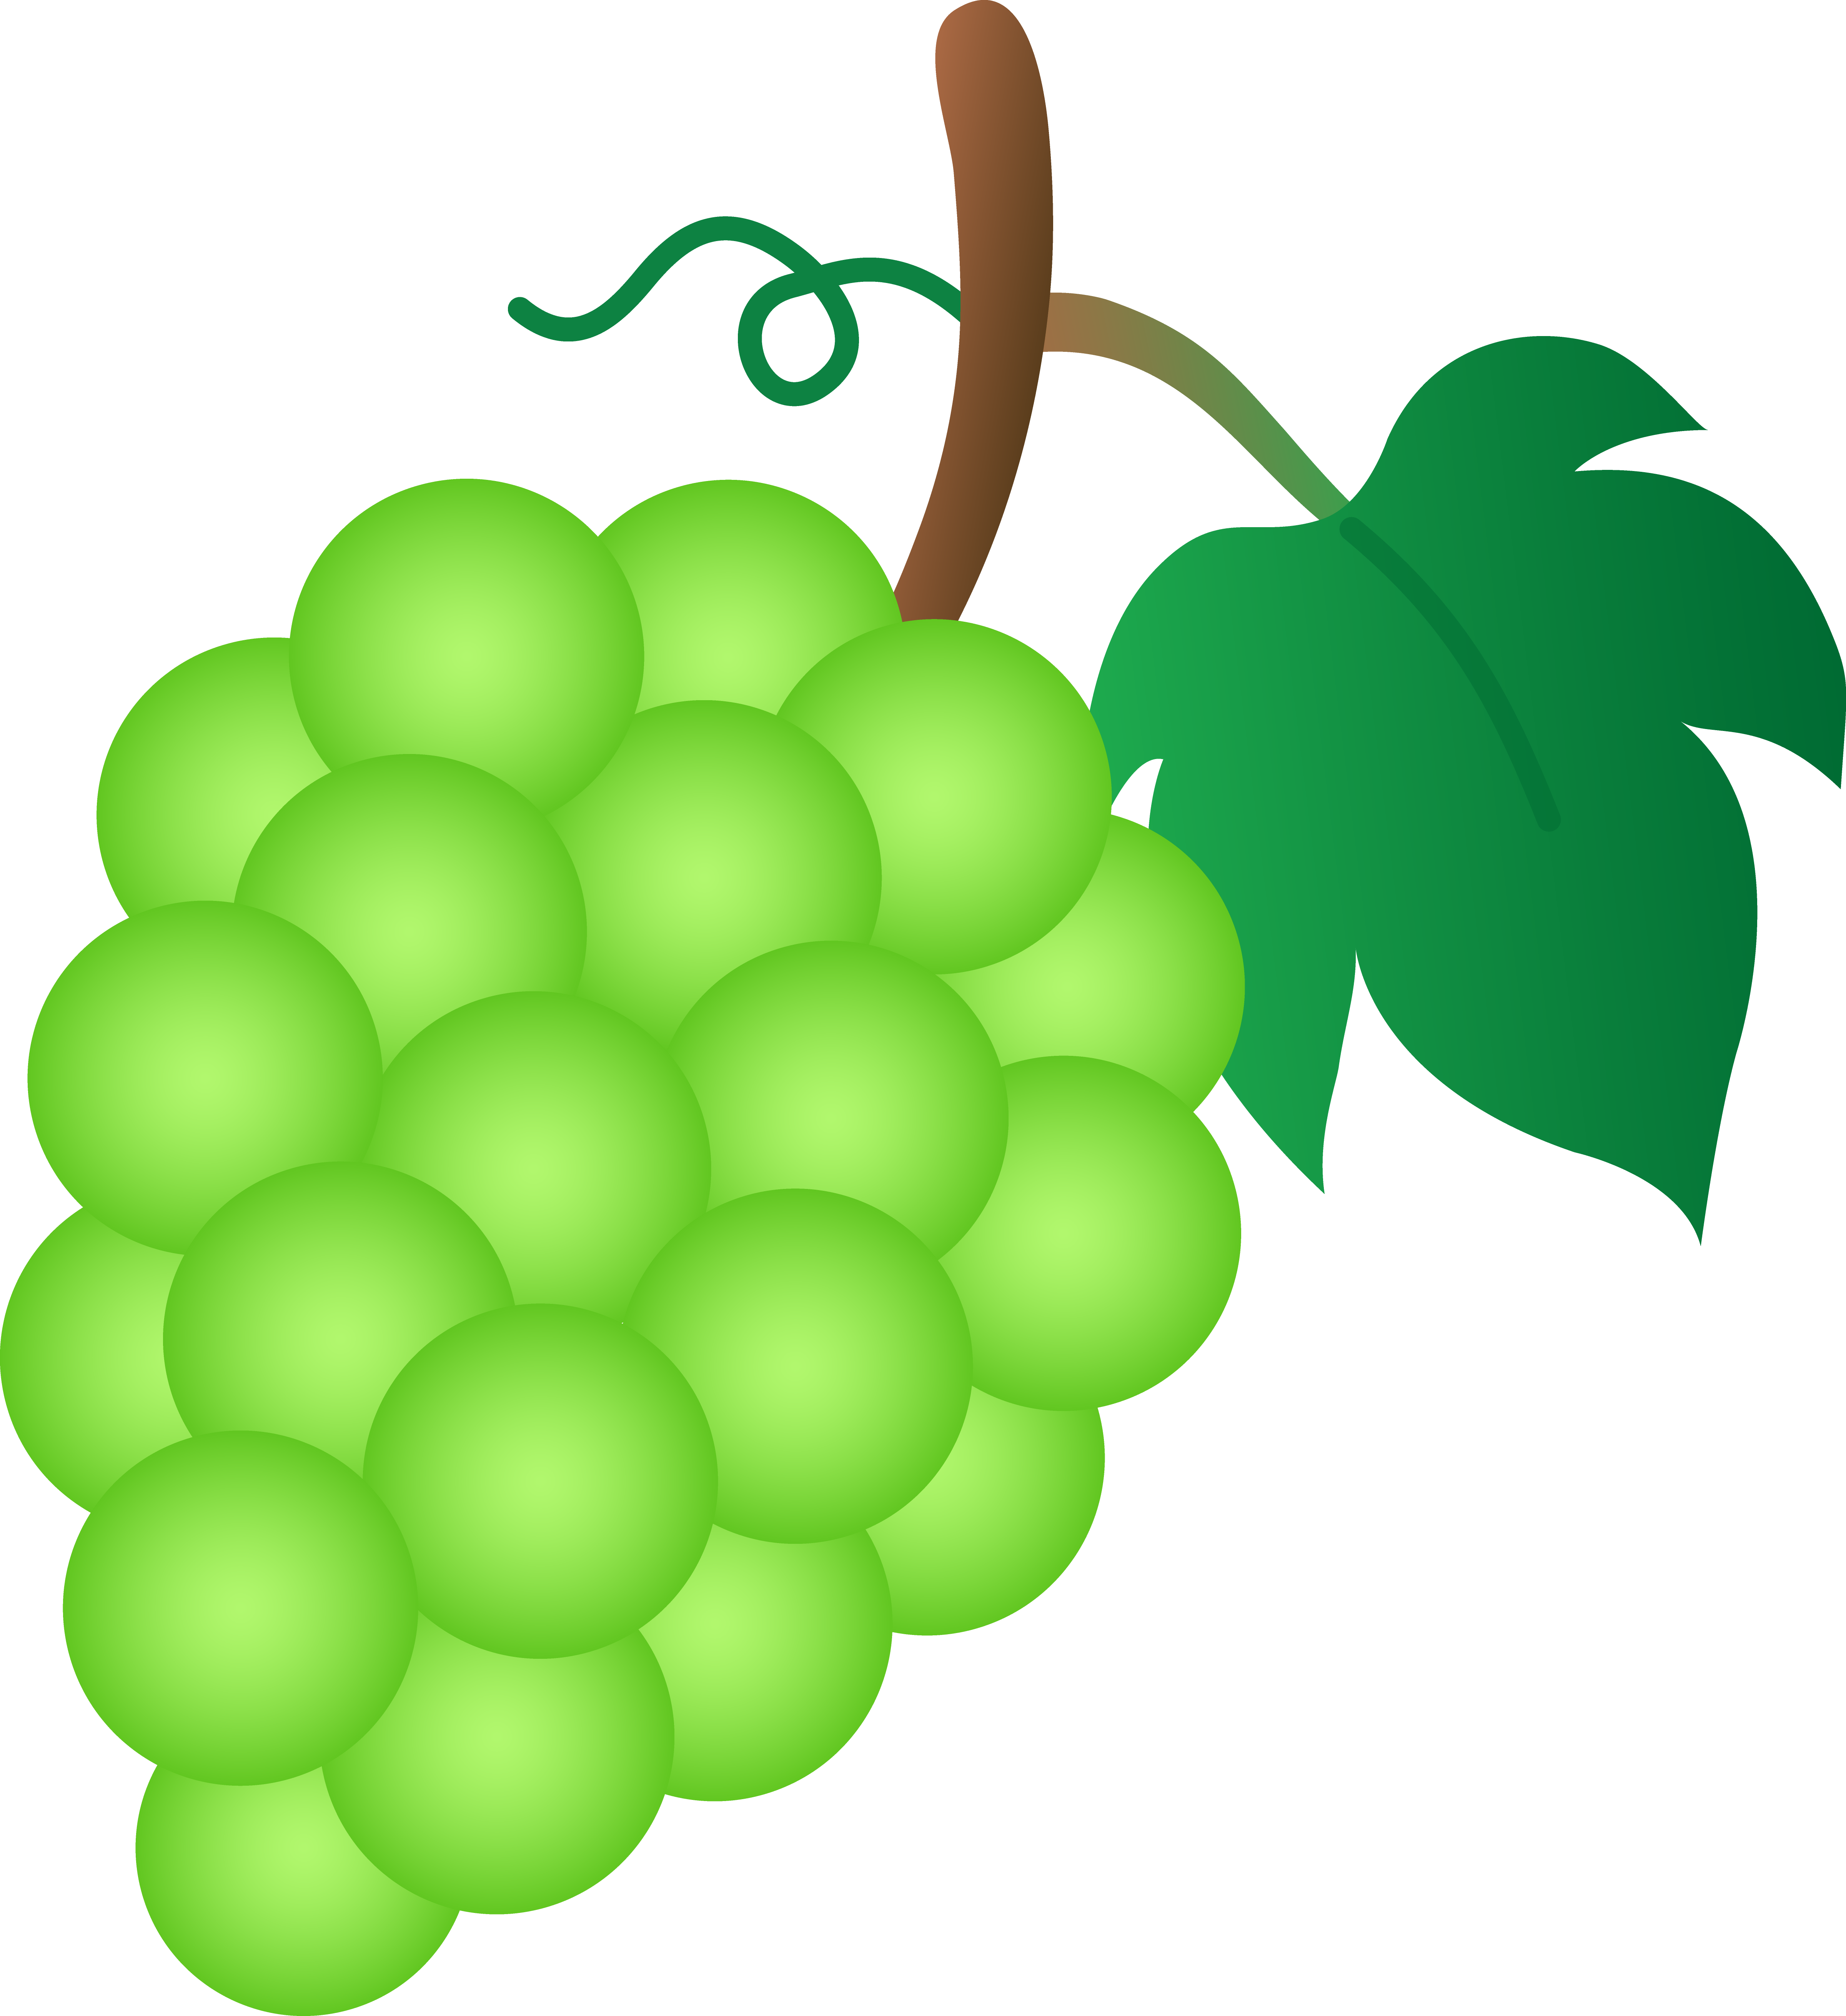 Grapes Clipart Free | Clipart library - Free Clipart Images